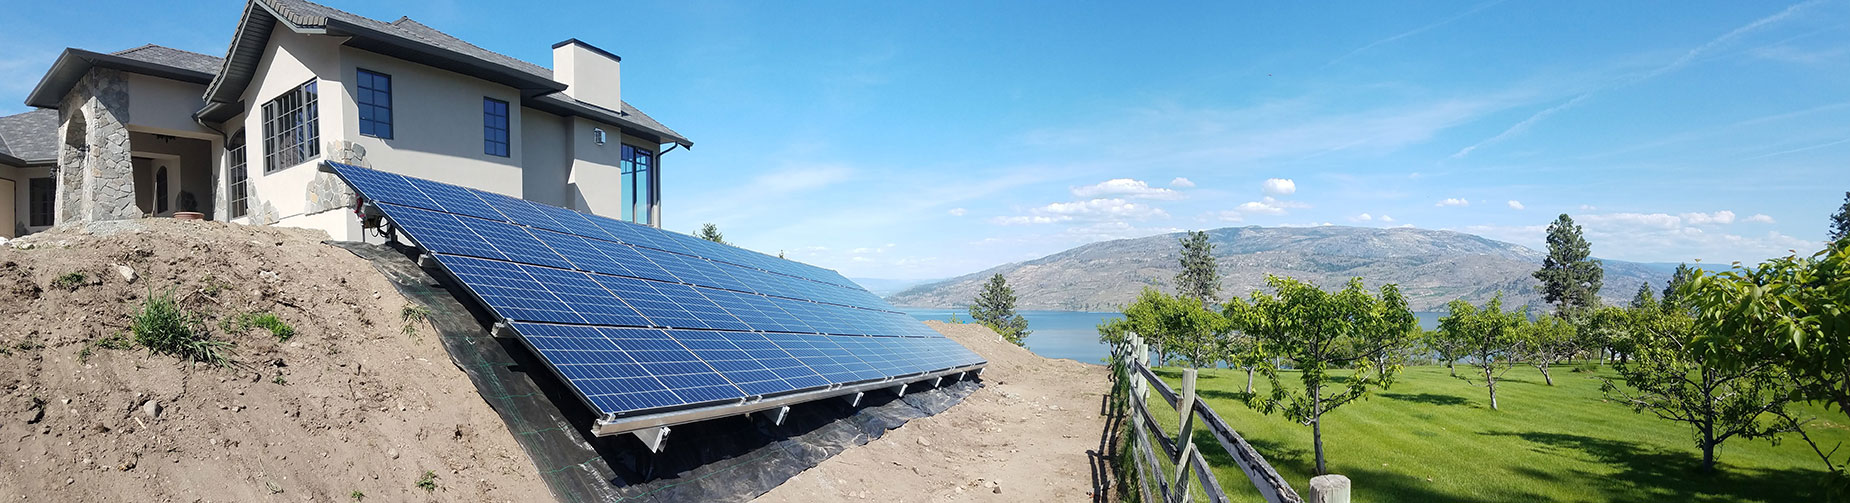 Okanagan Solar specializes in both solar and wind power and serves all locations in BC and even the Canadian north!